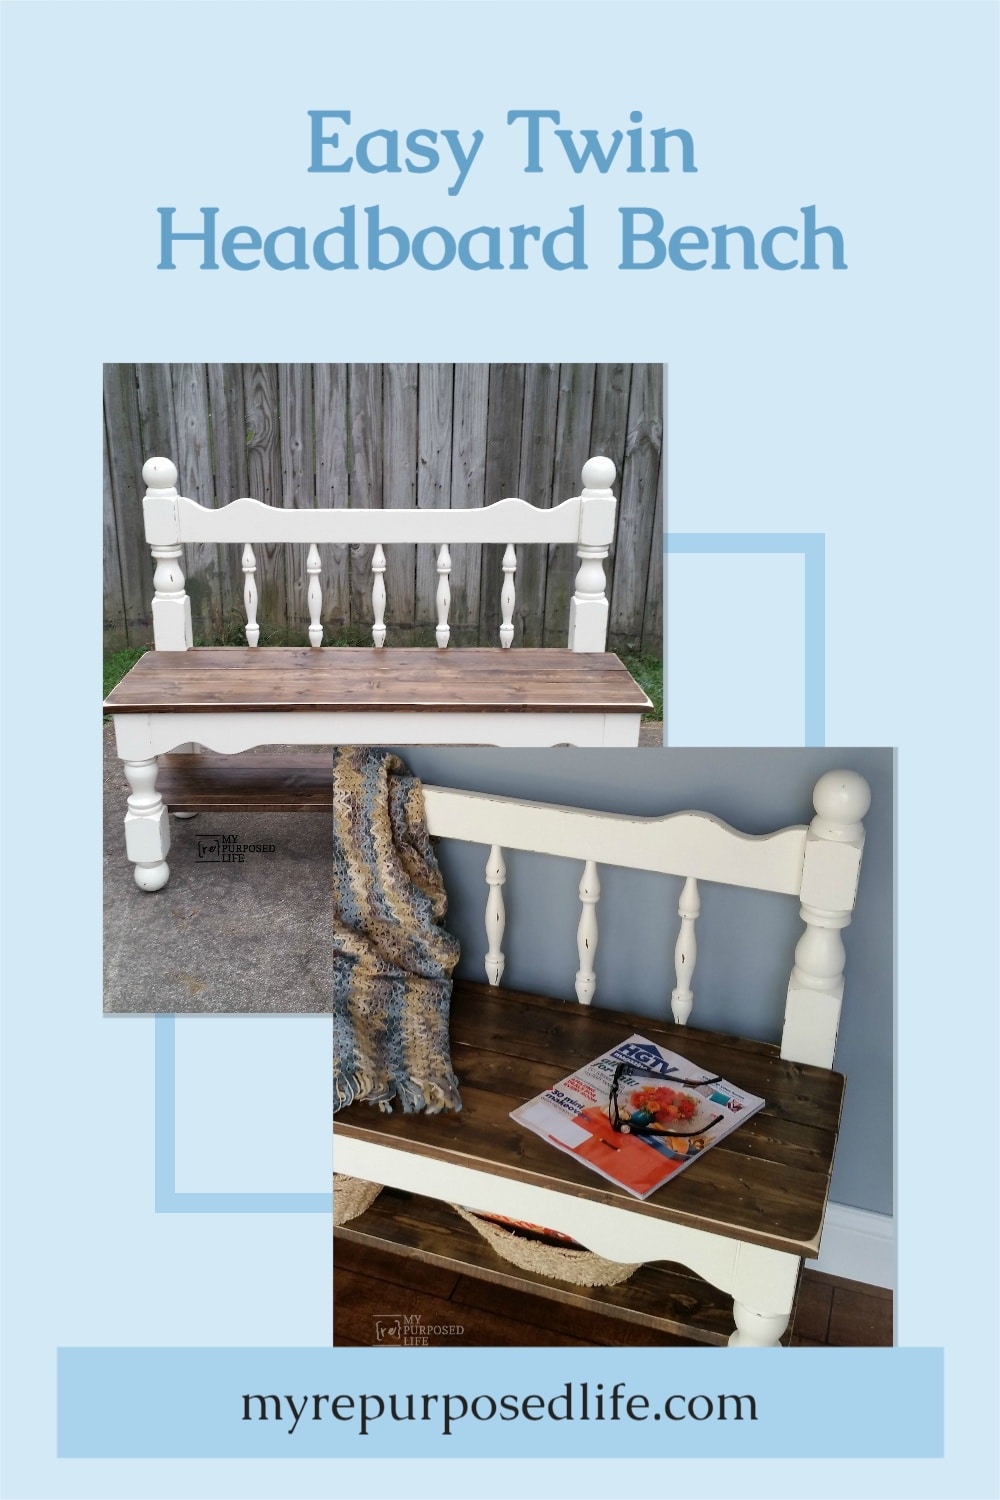 White Twin headboard bench. Easy bench tutorial so you can make one this weekend. Tips on distressing and more. #MyRepurposedLife #repurposed #furniture #headboard #bench #twinbed via @repurposedlife